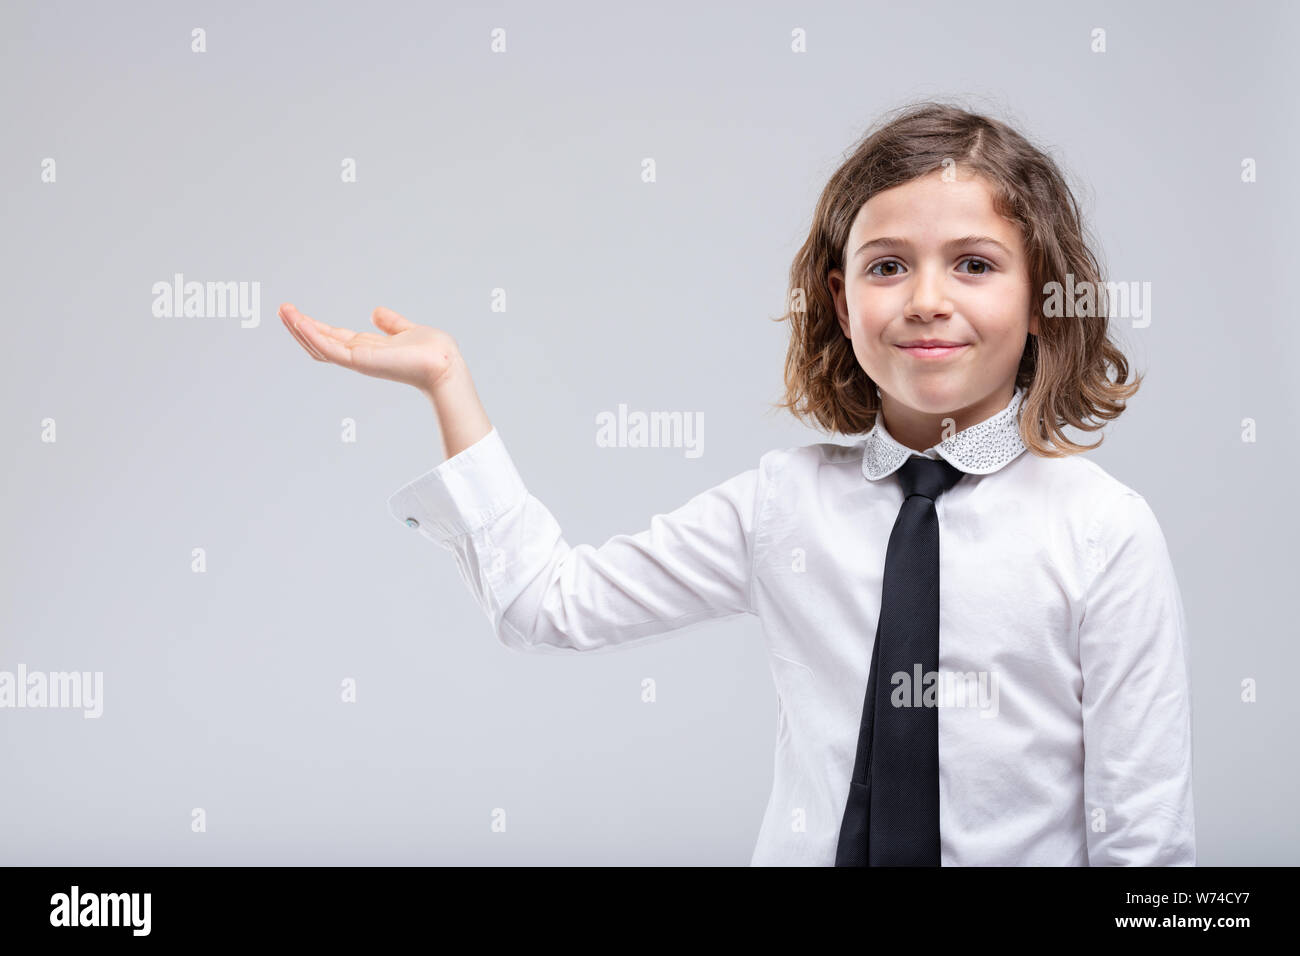 Young girl in school uniform holding out her empty palm to the side with a smile in a concept of product placement and advertising over a white backgr Stock Photo